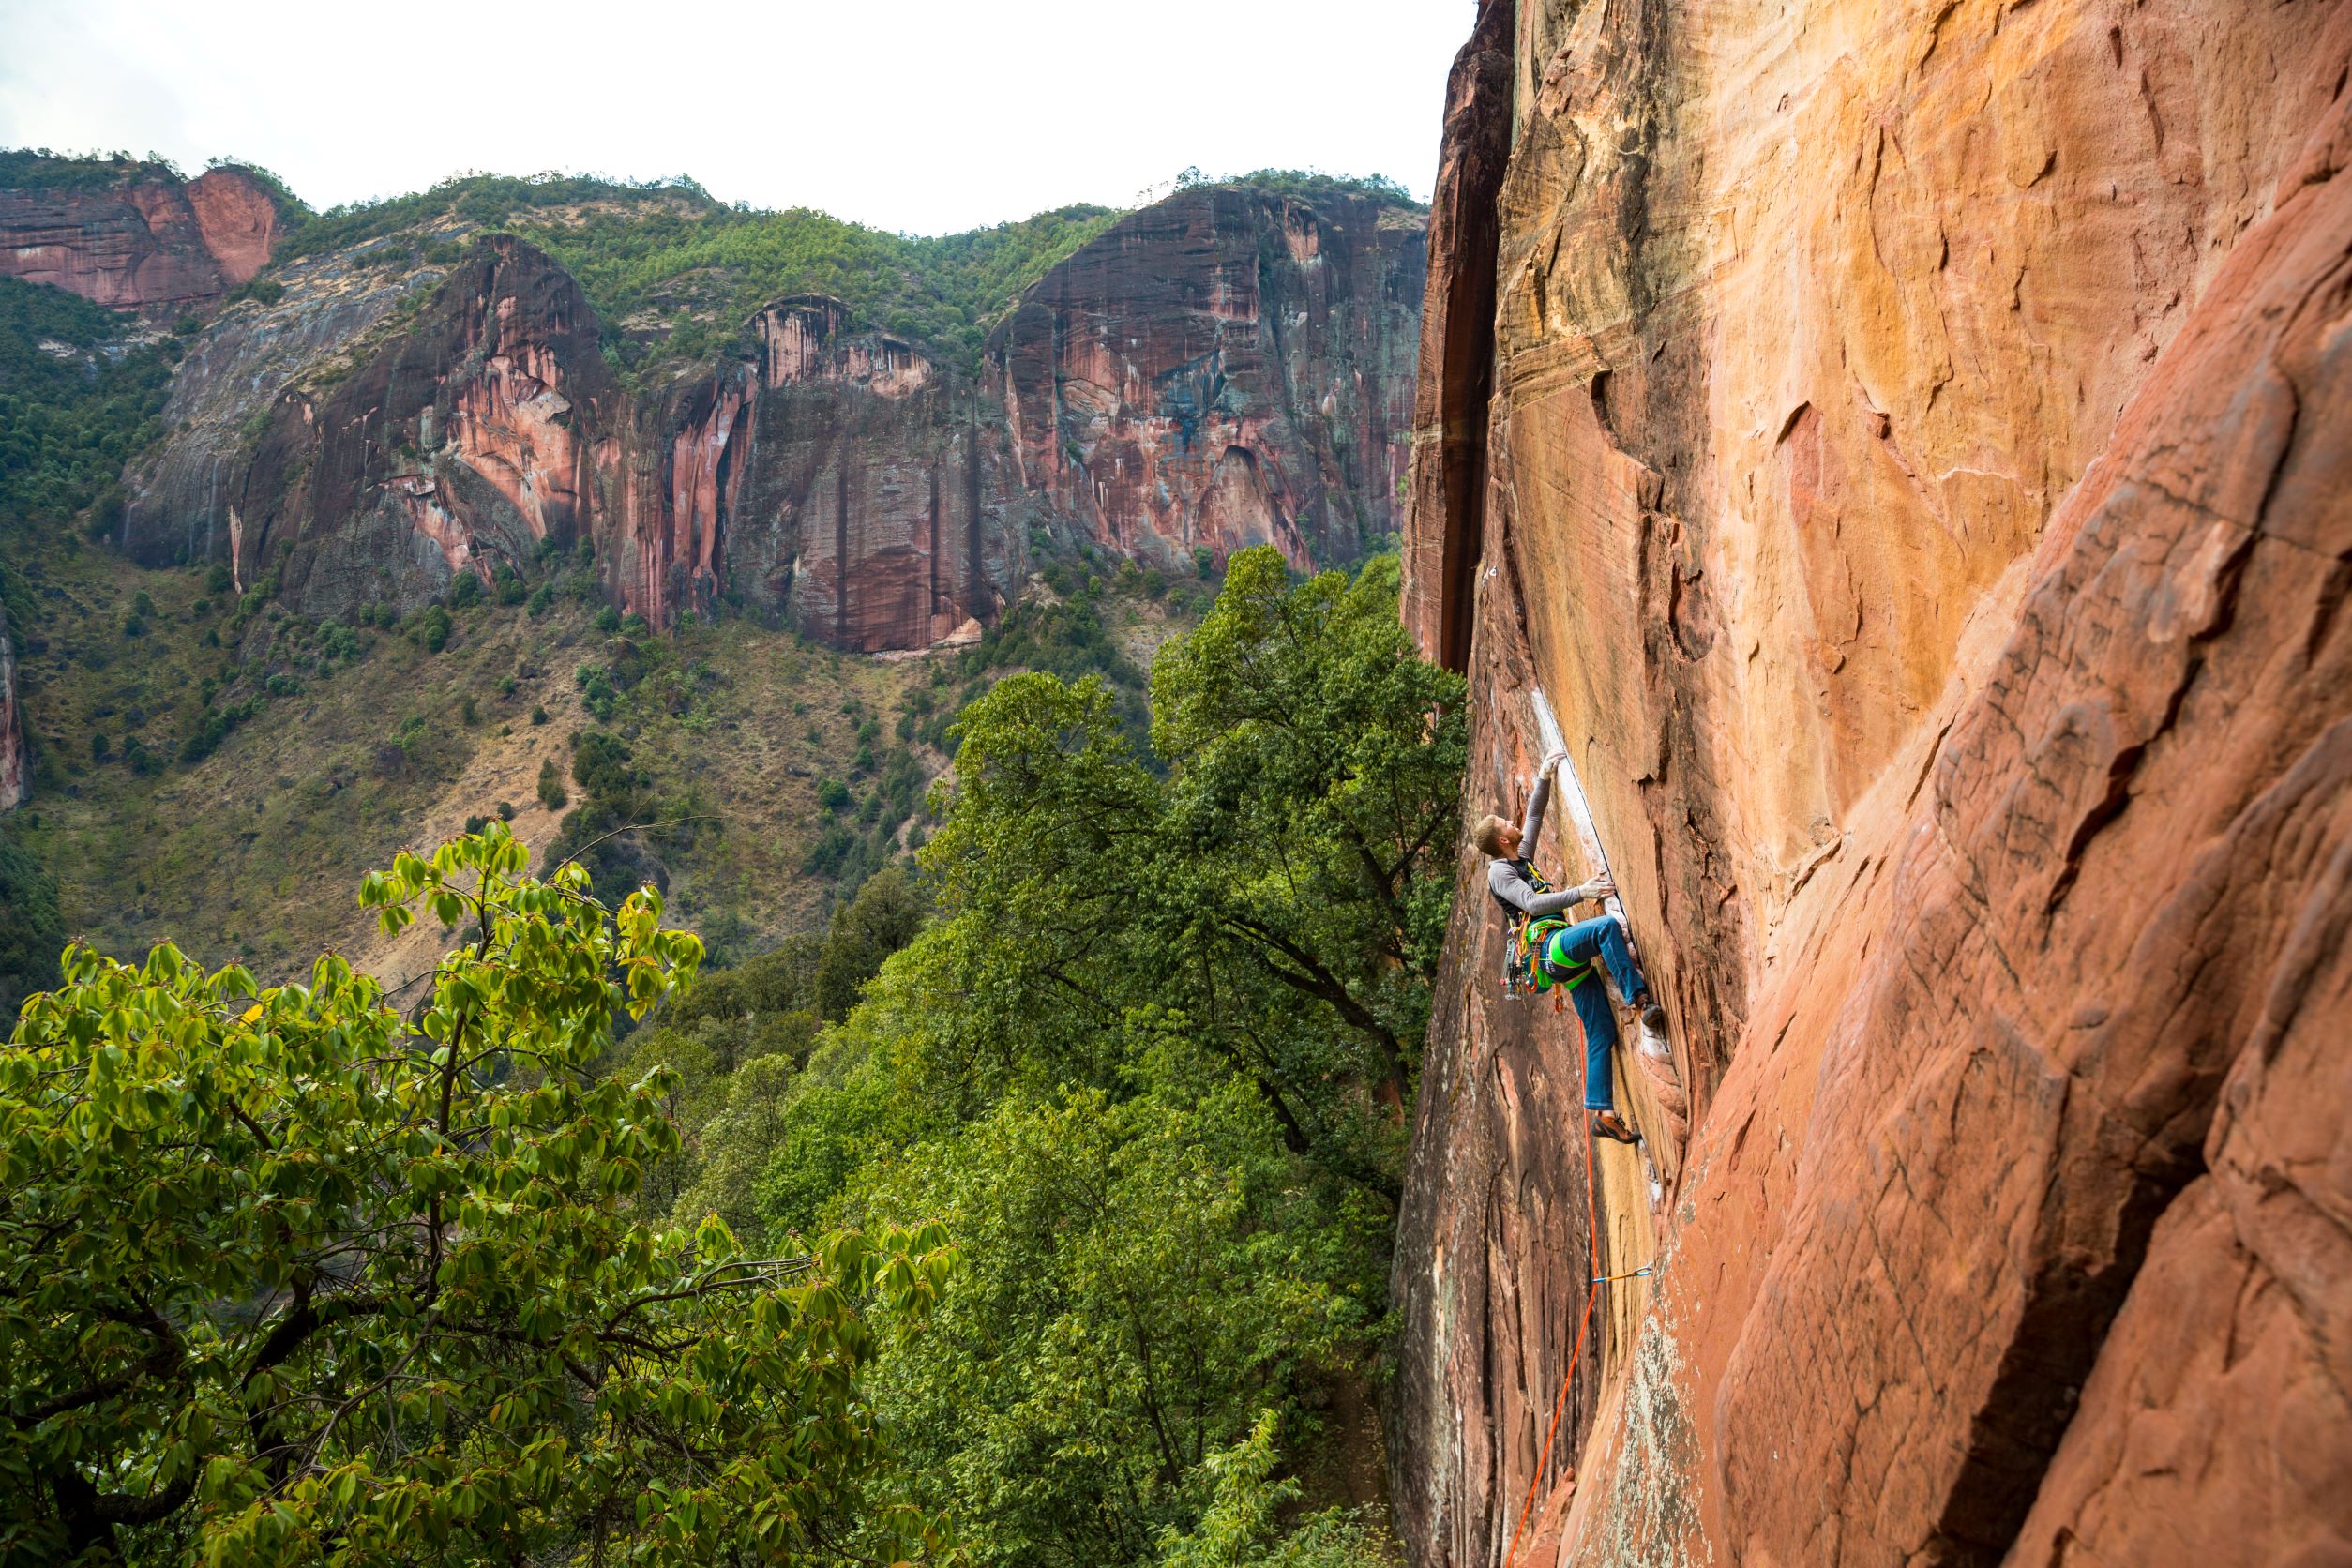 A climber in Liming, China